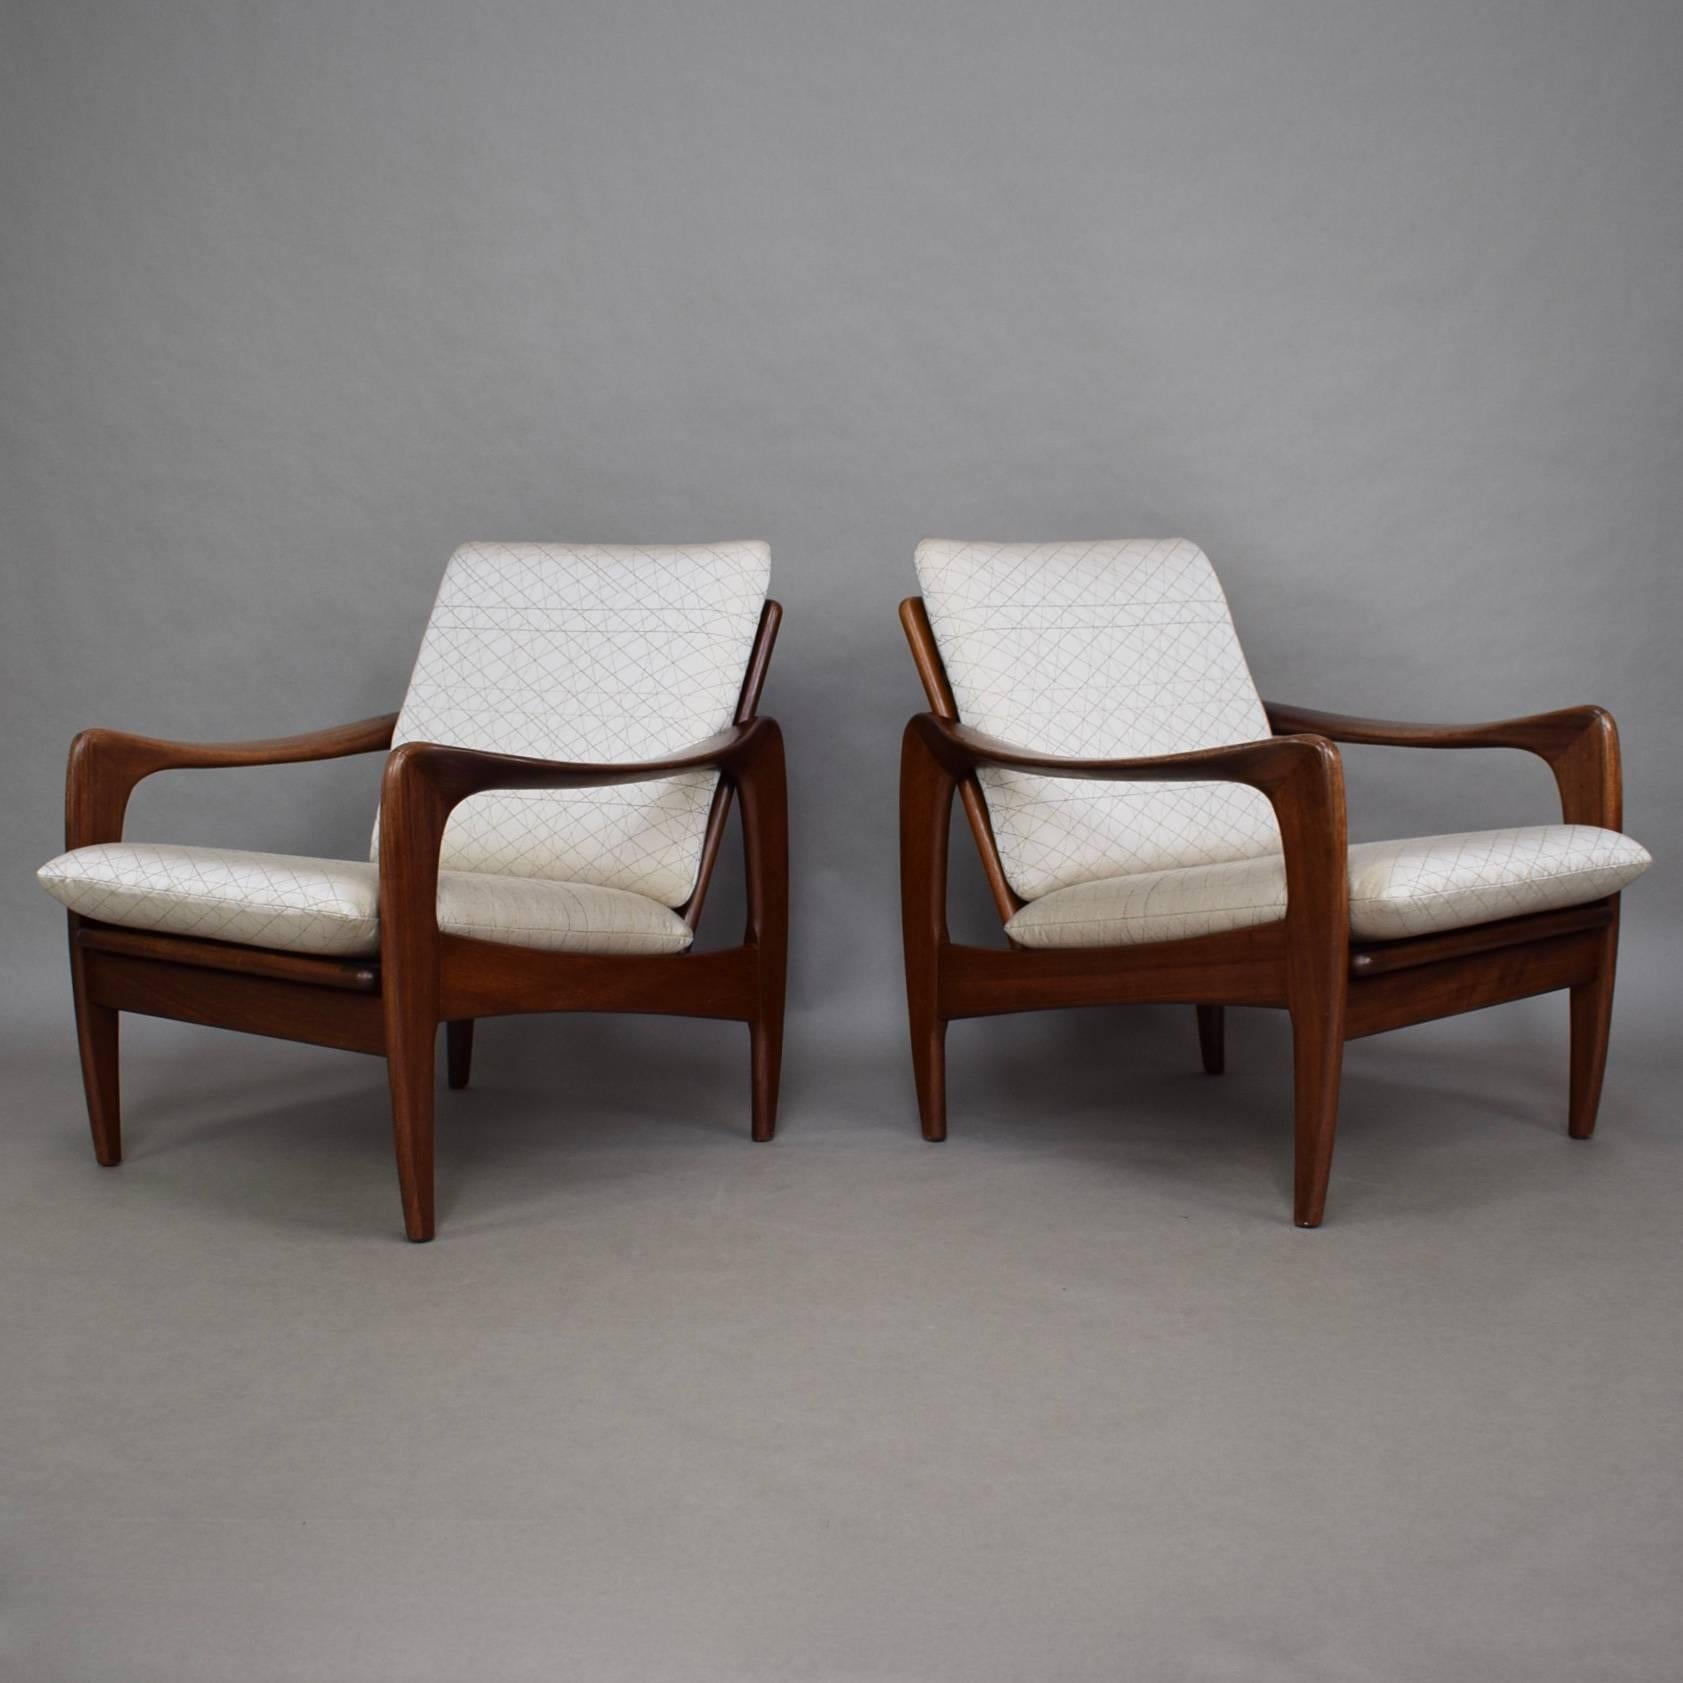 Dutch Pair of Teak Lounge Chairs by De Ster Gelderland, 1960s, New Upholstery